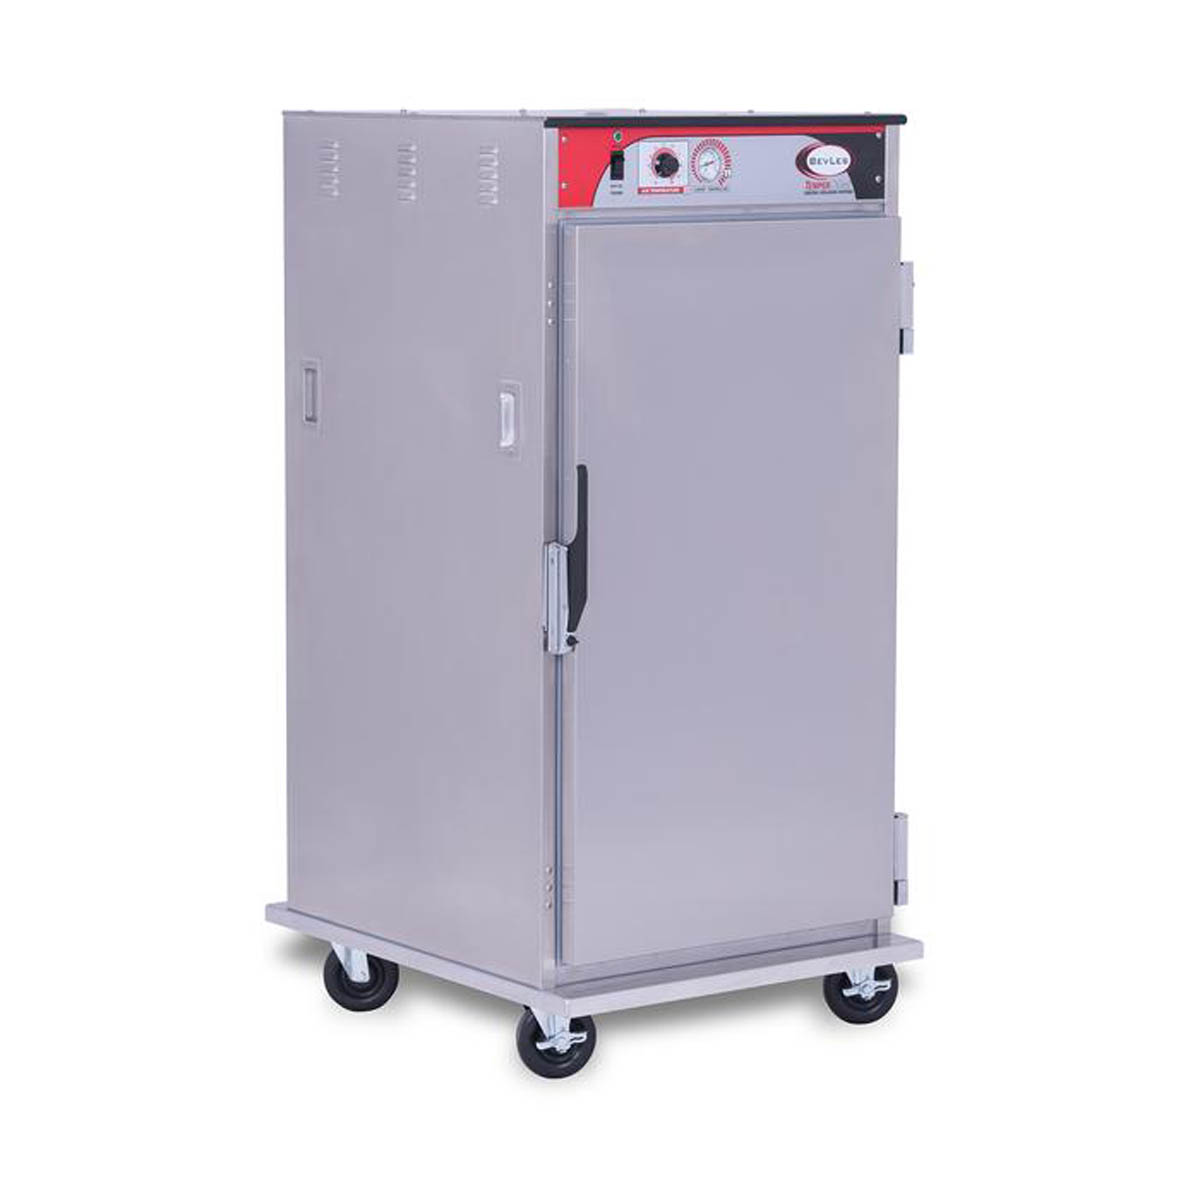 BevLes HTSS60P124 3/4 Size Heated Holding Cabinet, Narrow Width, 230V